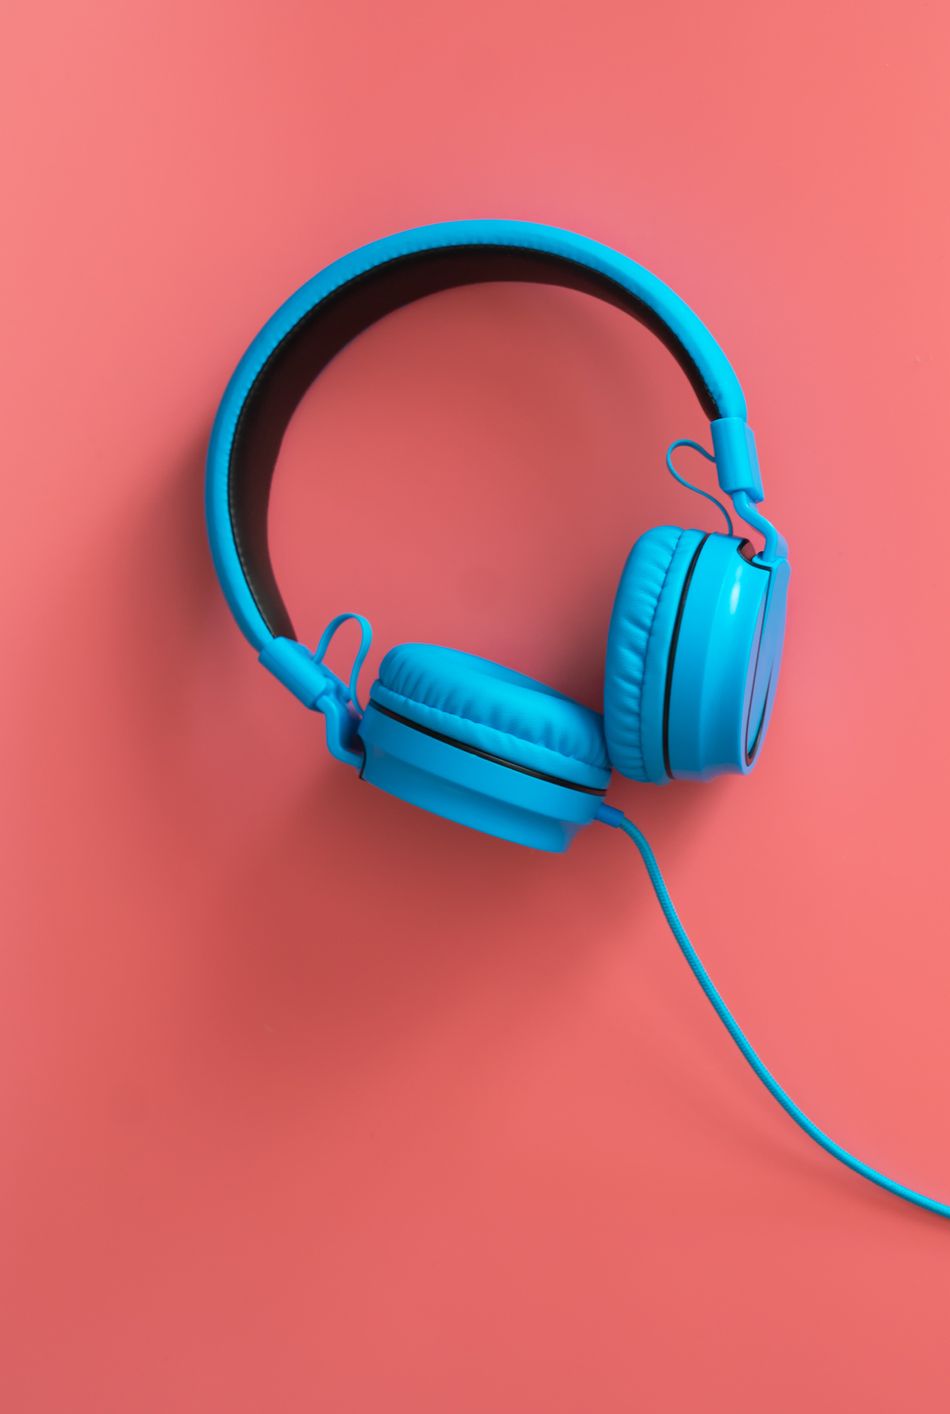 headphones on the pink background